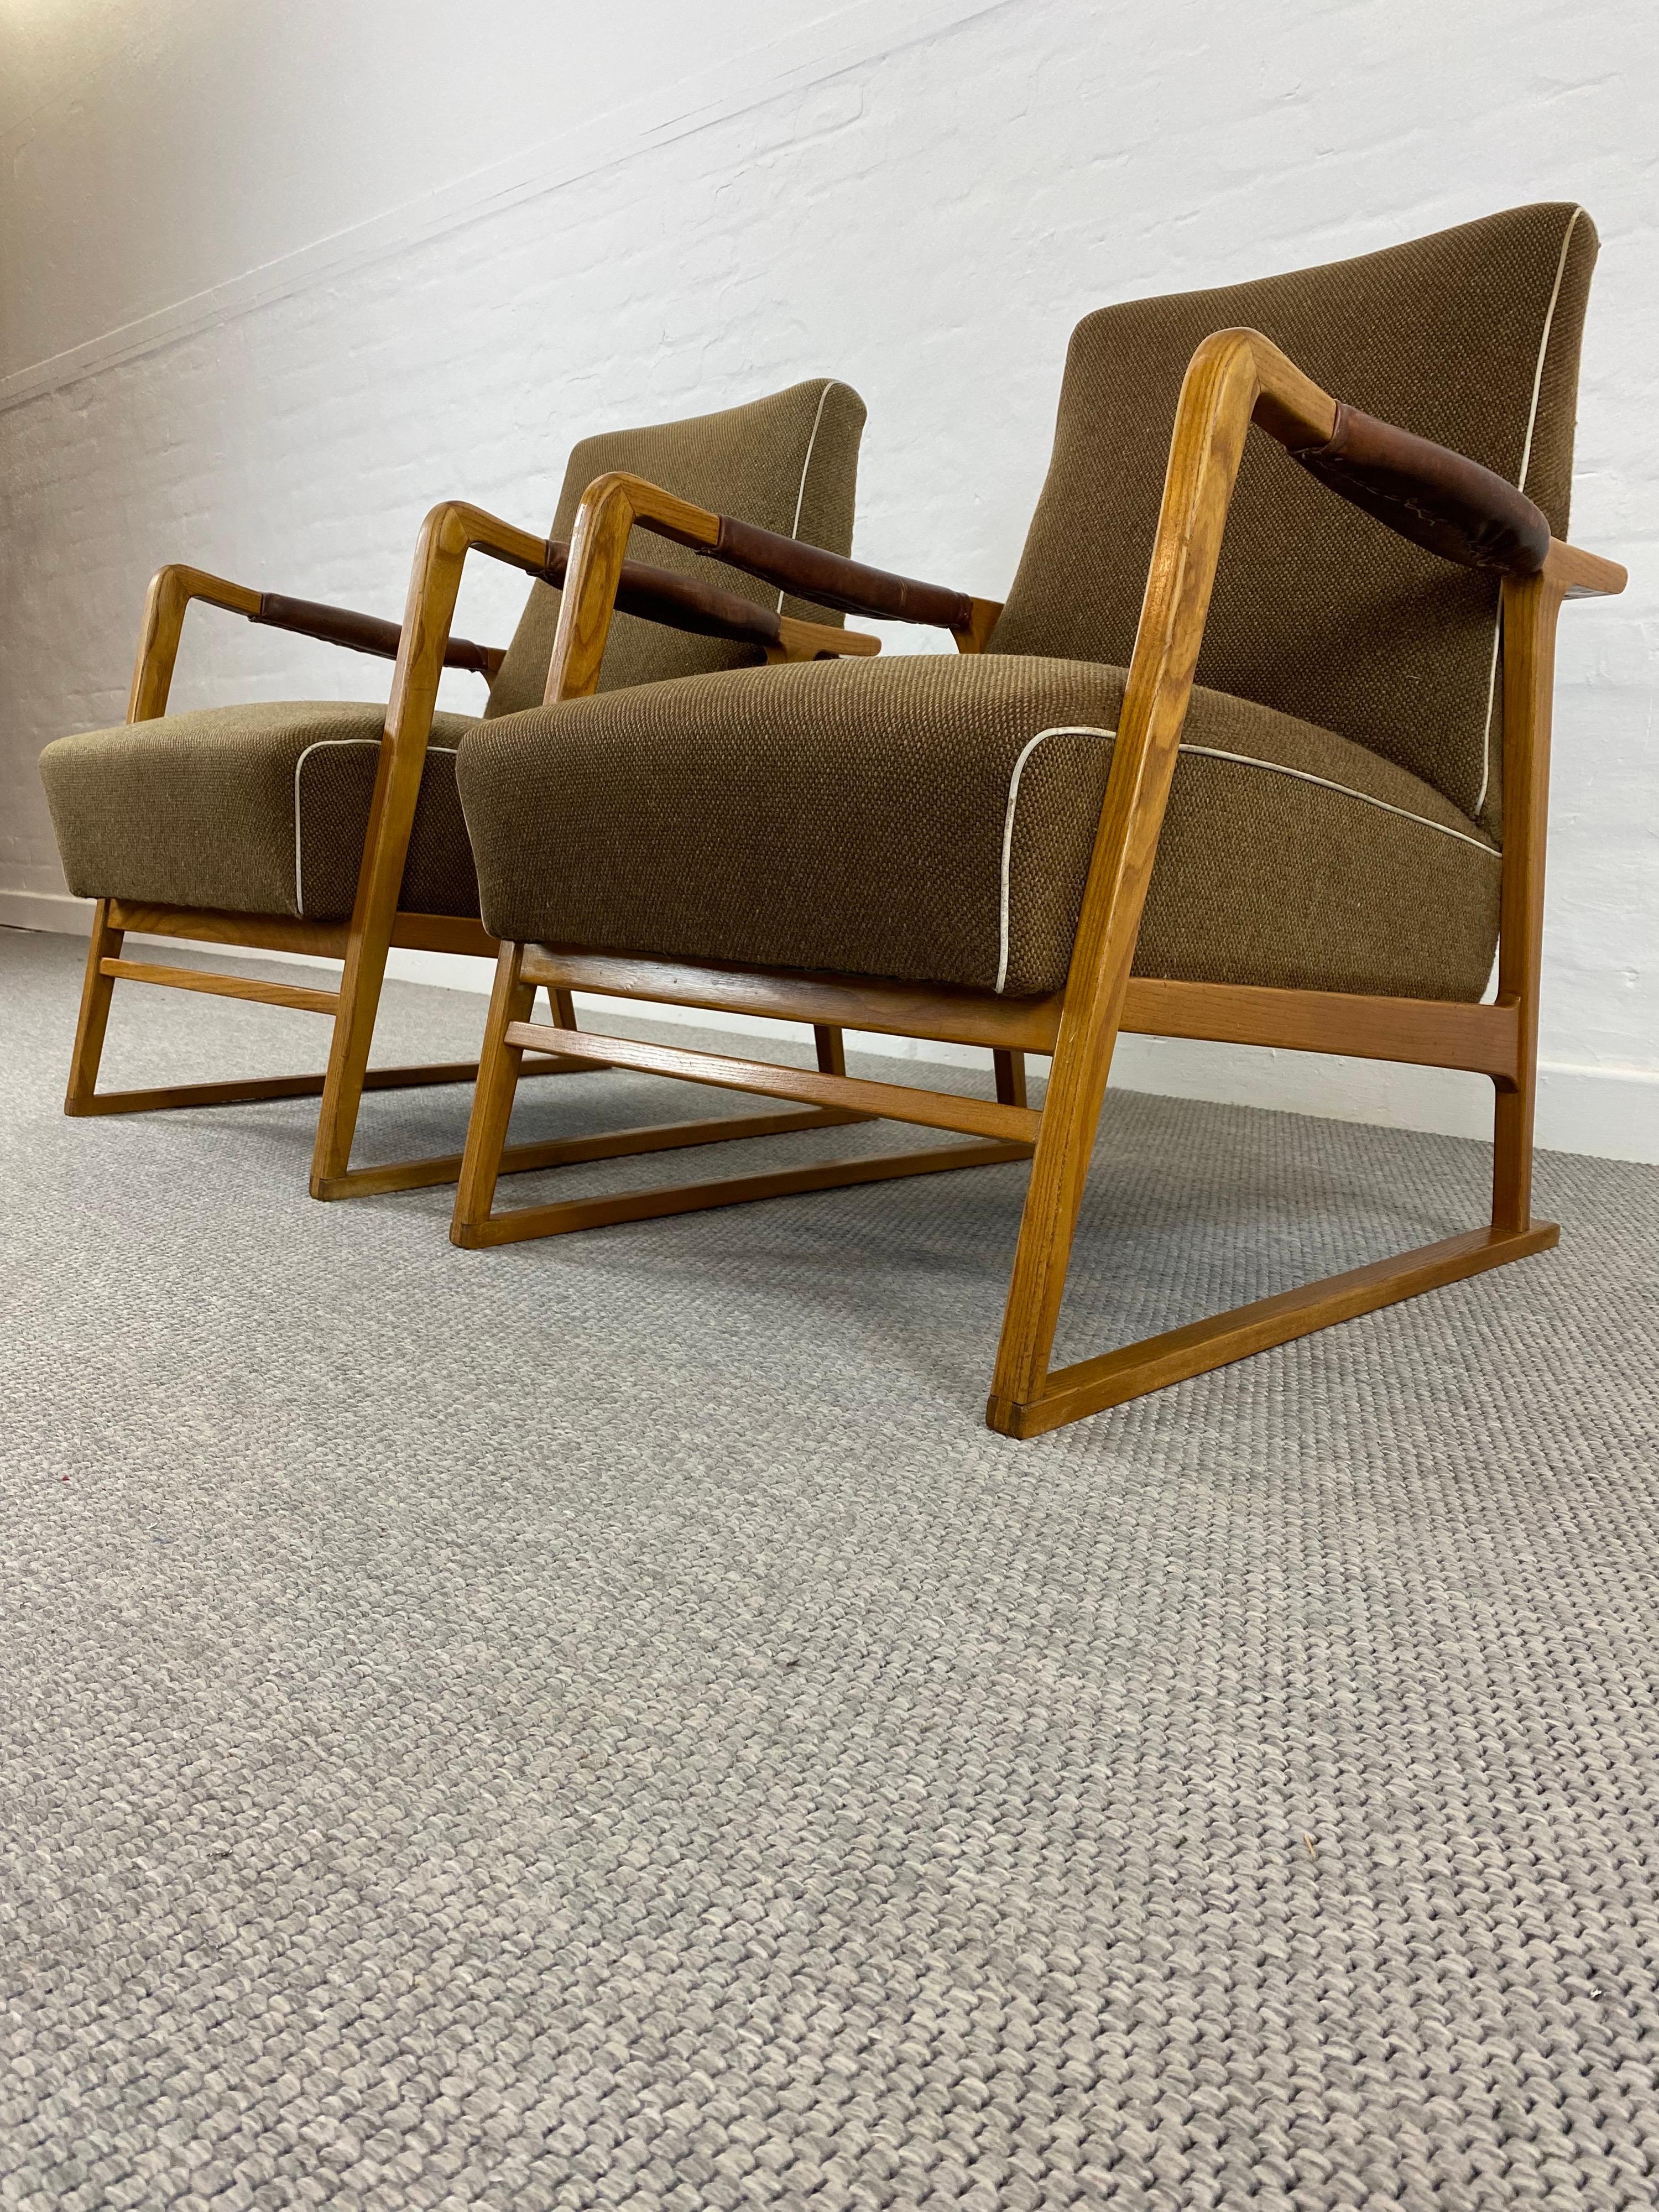 A very rare pair of midcentury WK arm-chairs with runners in solid Ash.
Designed in early 1950s for Deutsche Werkstätten these armchairs have an extraordinary shape with runners made for better stability and comfortable sliding over carpets for